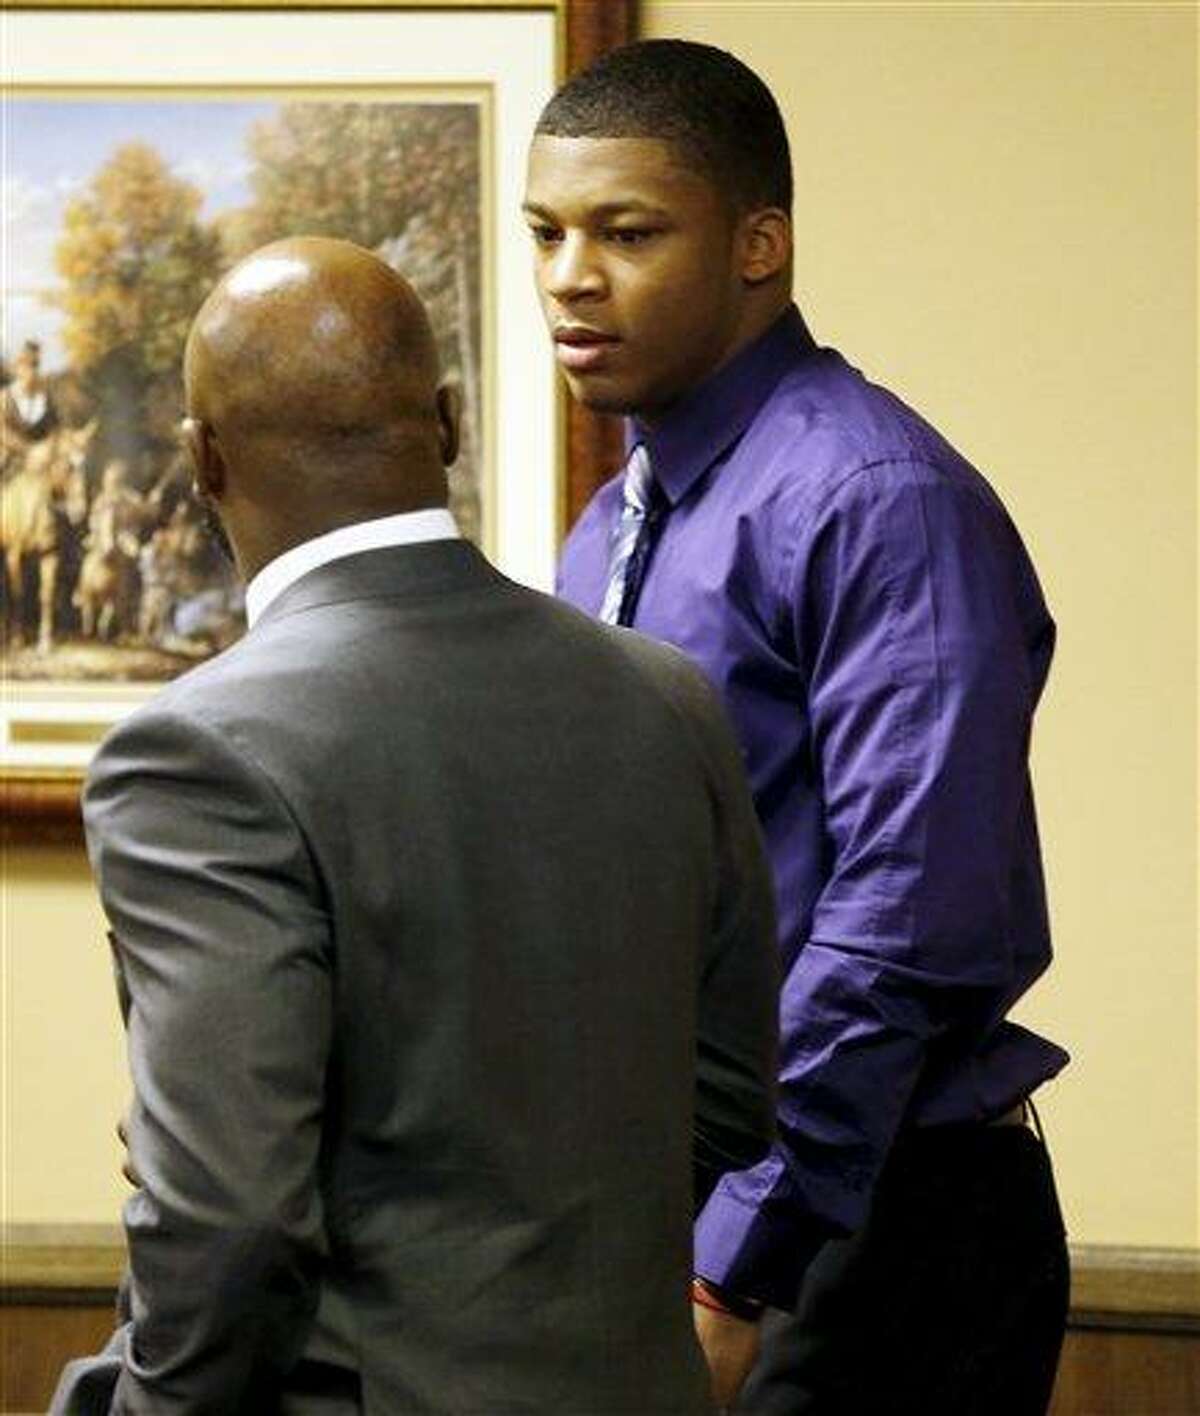 MaysMa'lik Richmond, 16, right, talks with hsia attorner Walter madison as they enter court for the fourth day of his and co-defendant, 17-year-old Trent Mays trial on rape charges in juvenile court on Saturday, March 16, 2013 in Steubenville, Ohio. Mays and Richmond are accused of raping a 16-year-old West Virginia girl in August, 2012. (AP Photo/Keith Srakocic, Pool)